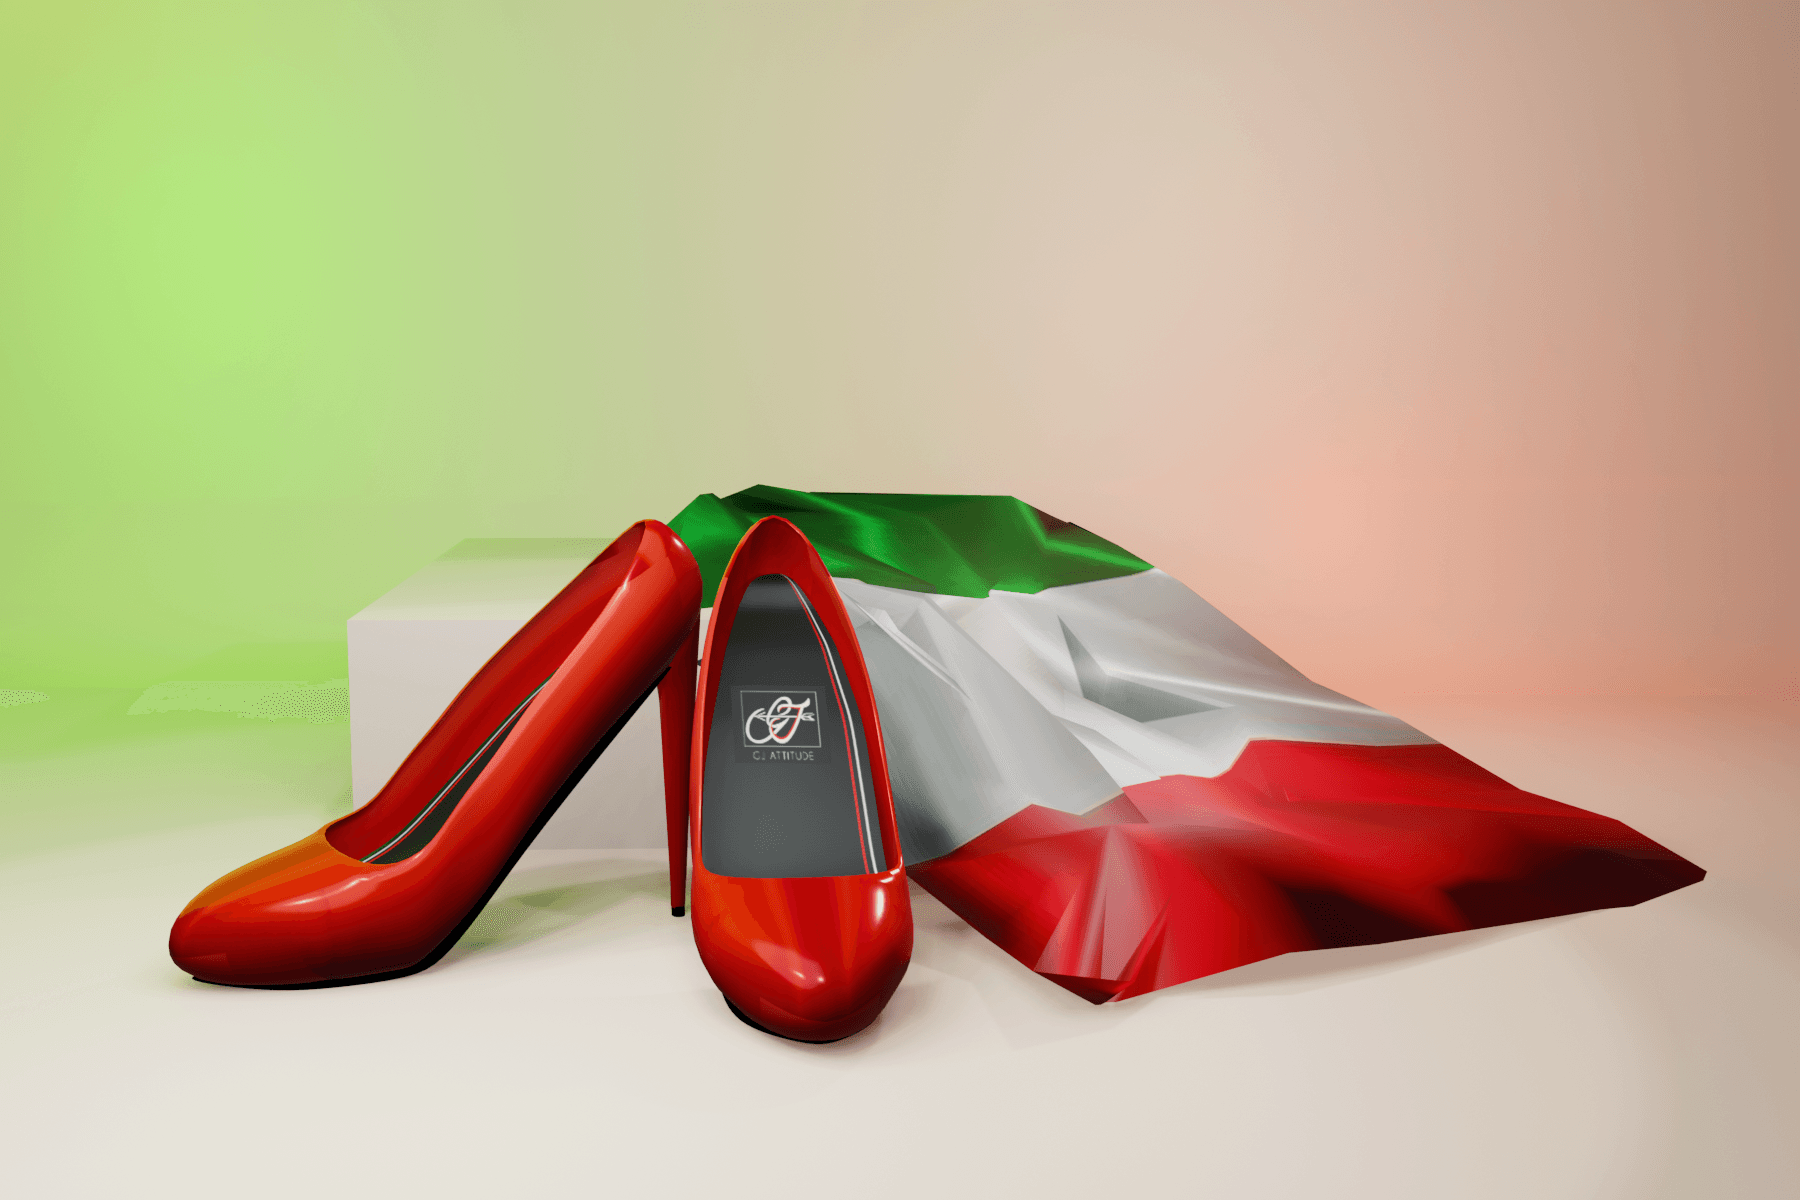 Red Shoes in ITALY